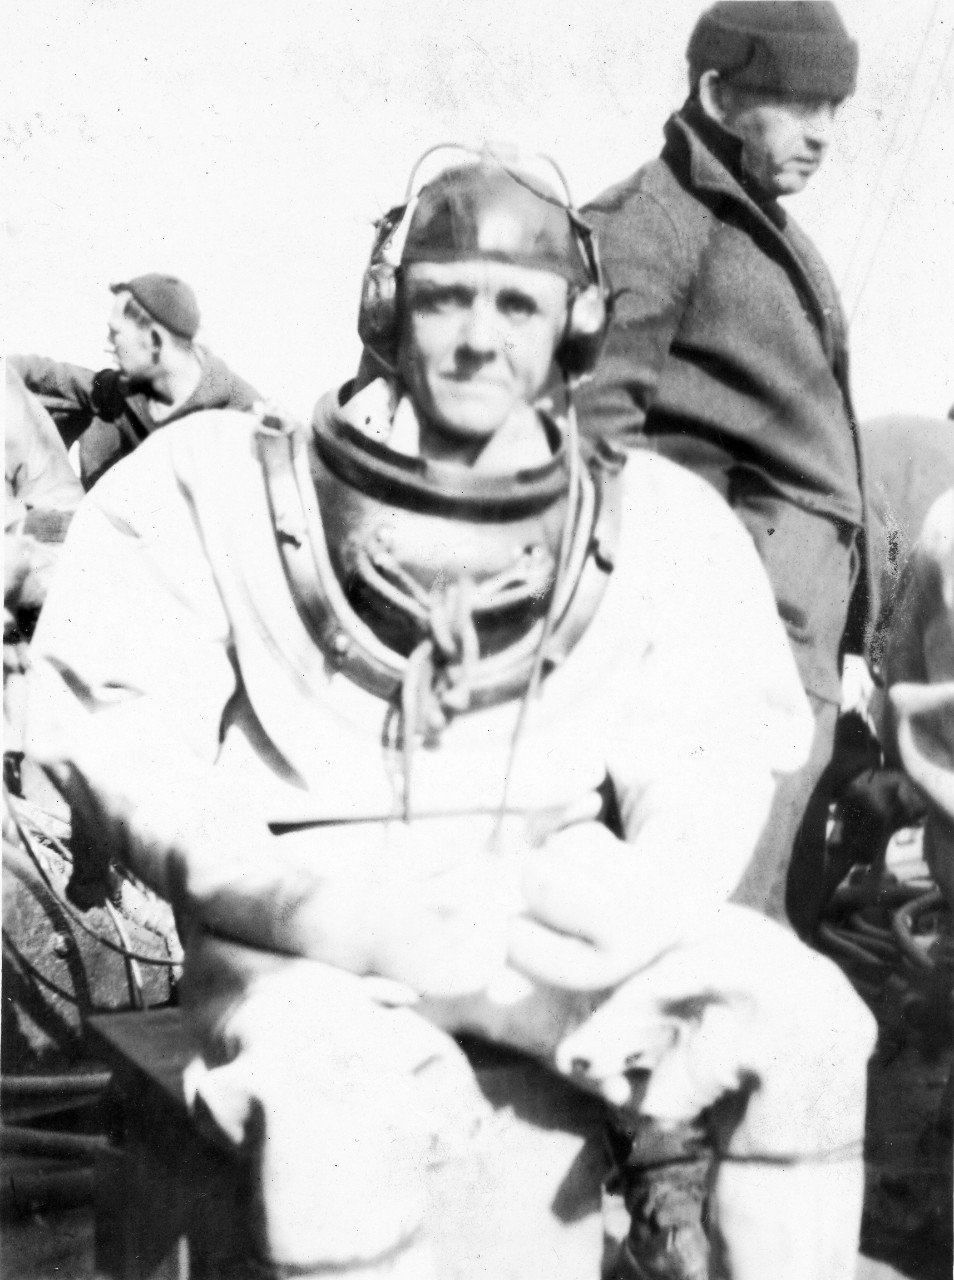 Von der Wall, diver who participated in salvage operations on USS S-4. 